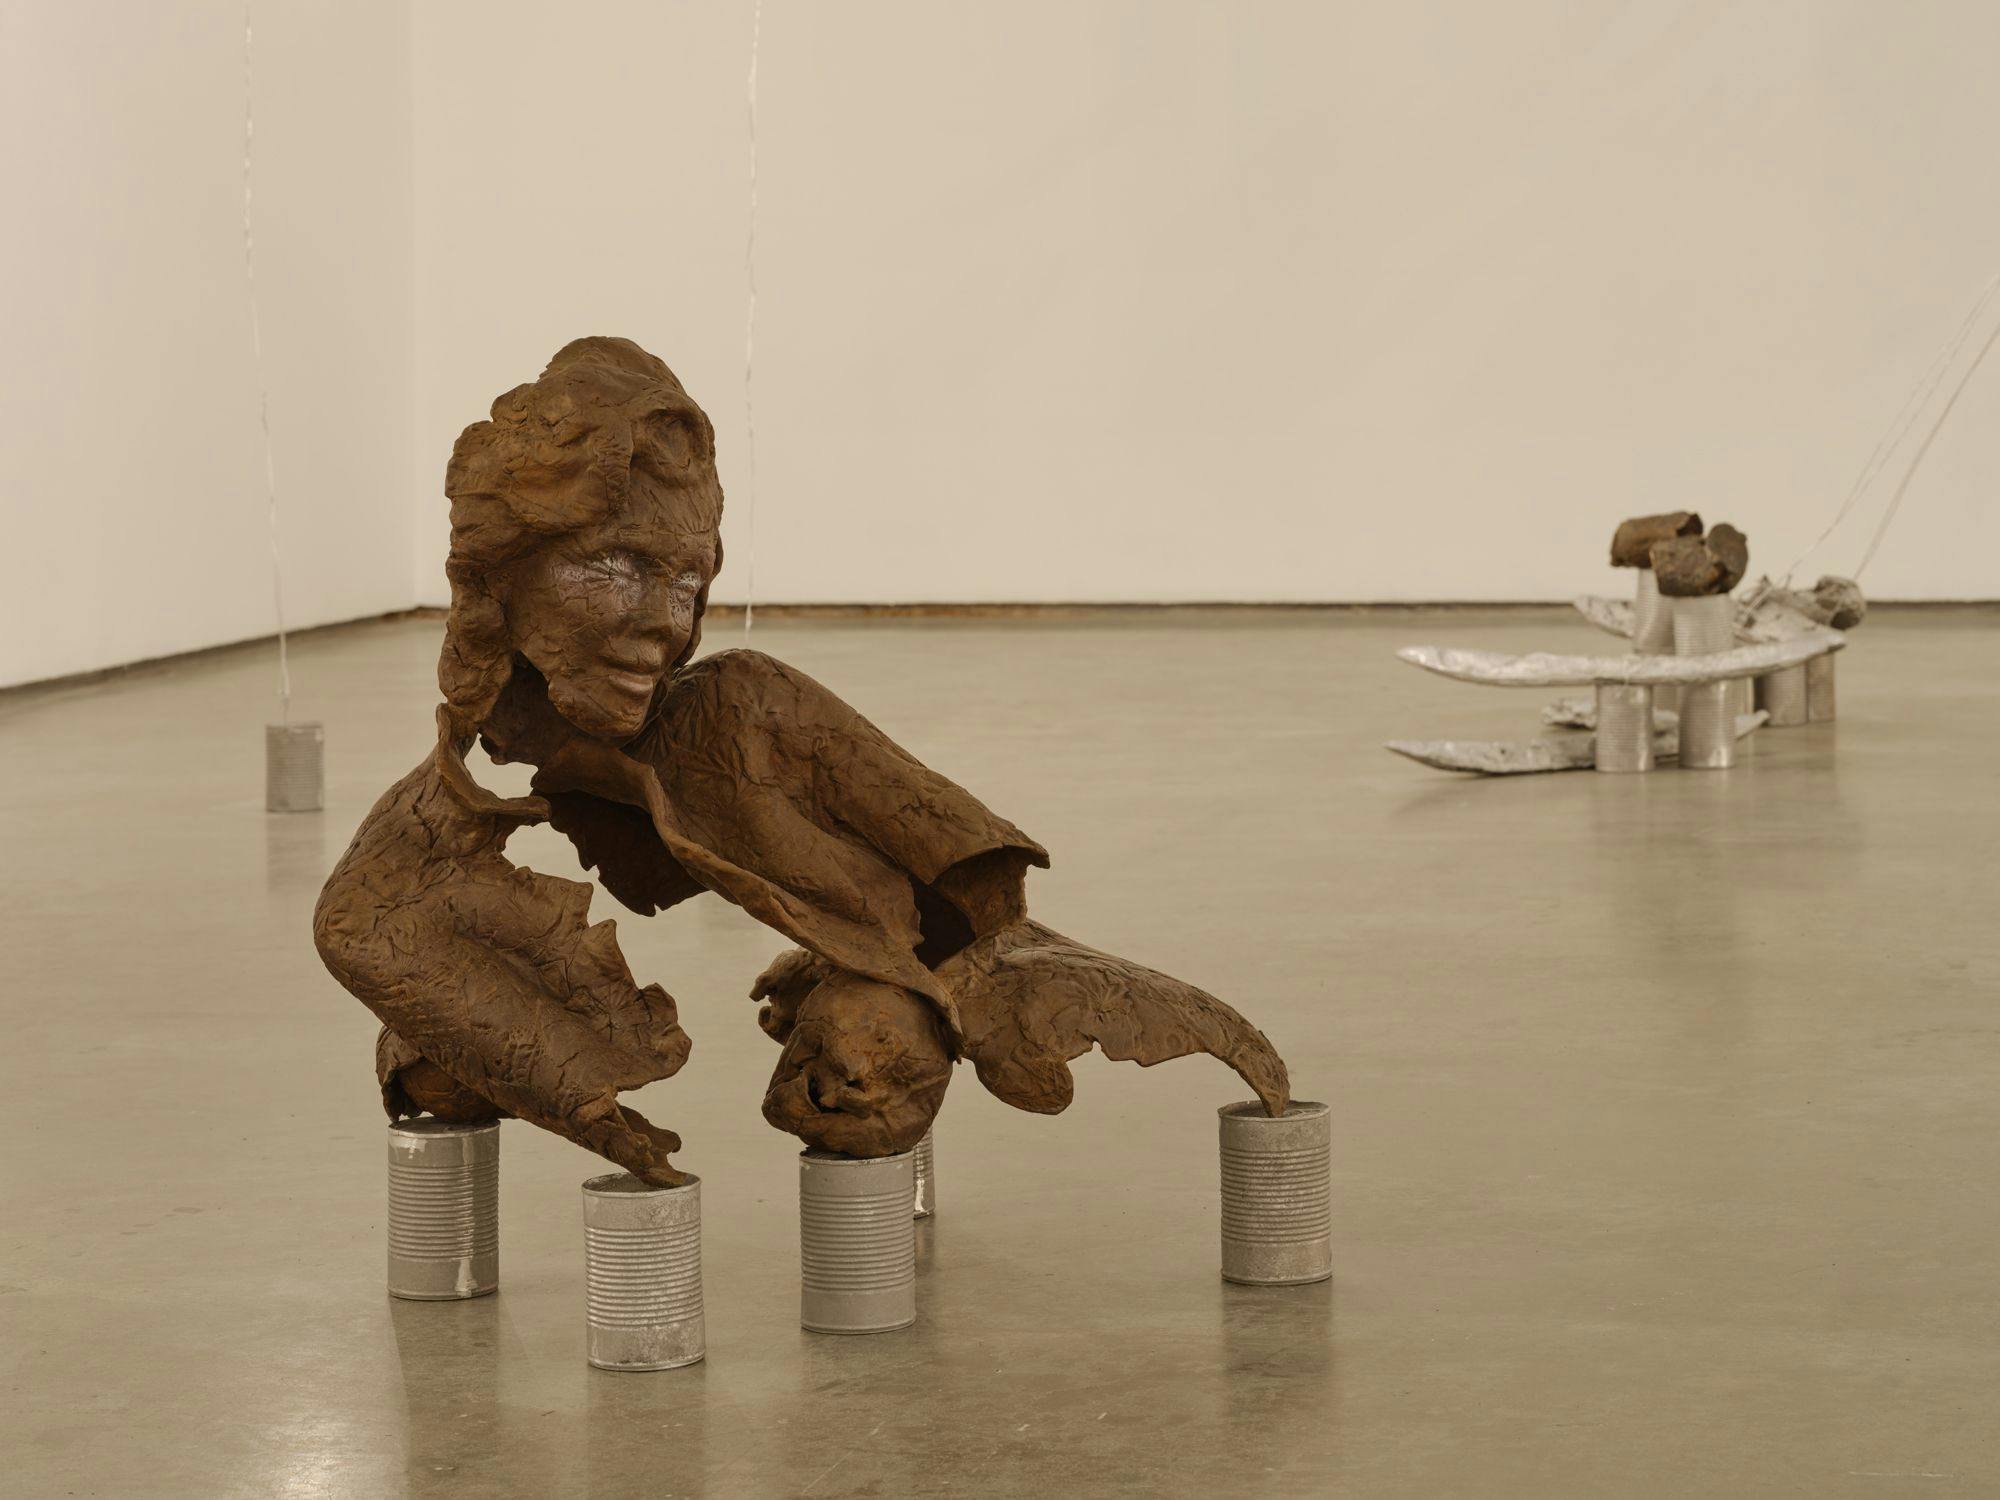 A bronze sculpture of a partial human figure sits on aluminum cans on a concrete floor. The sculpture's form appears to be precarious. Behind it are silver baguettes and aluminum cans.